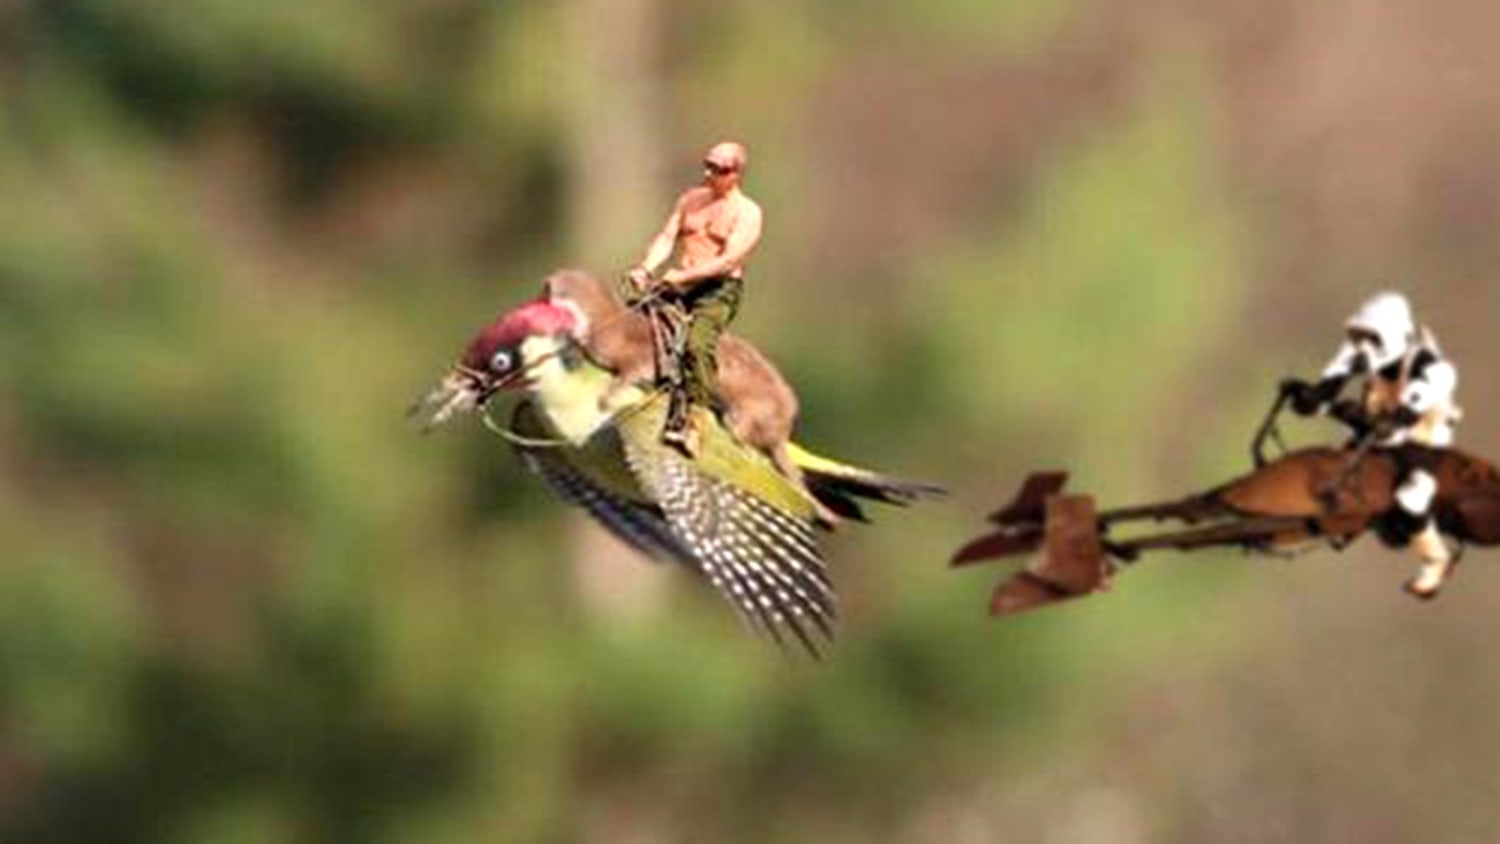 Move over, weasel! See who's riding the woodpecker in this amazing meme